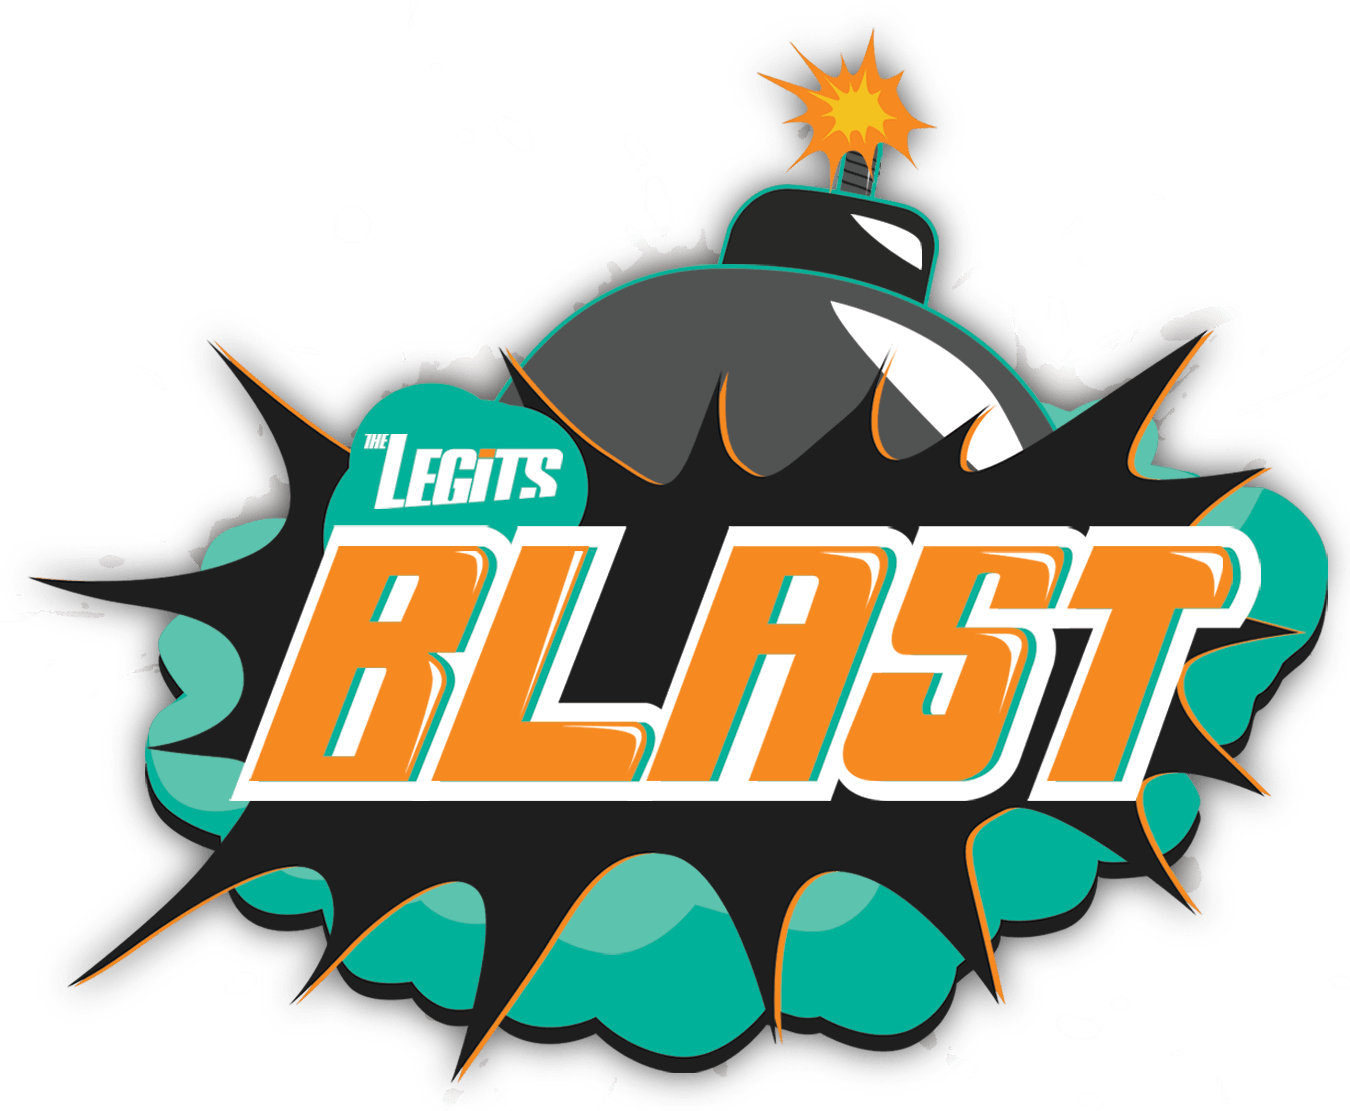 Blast Logo - the legits blast logo | The Legits - Events | Video production ...